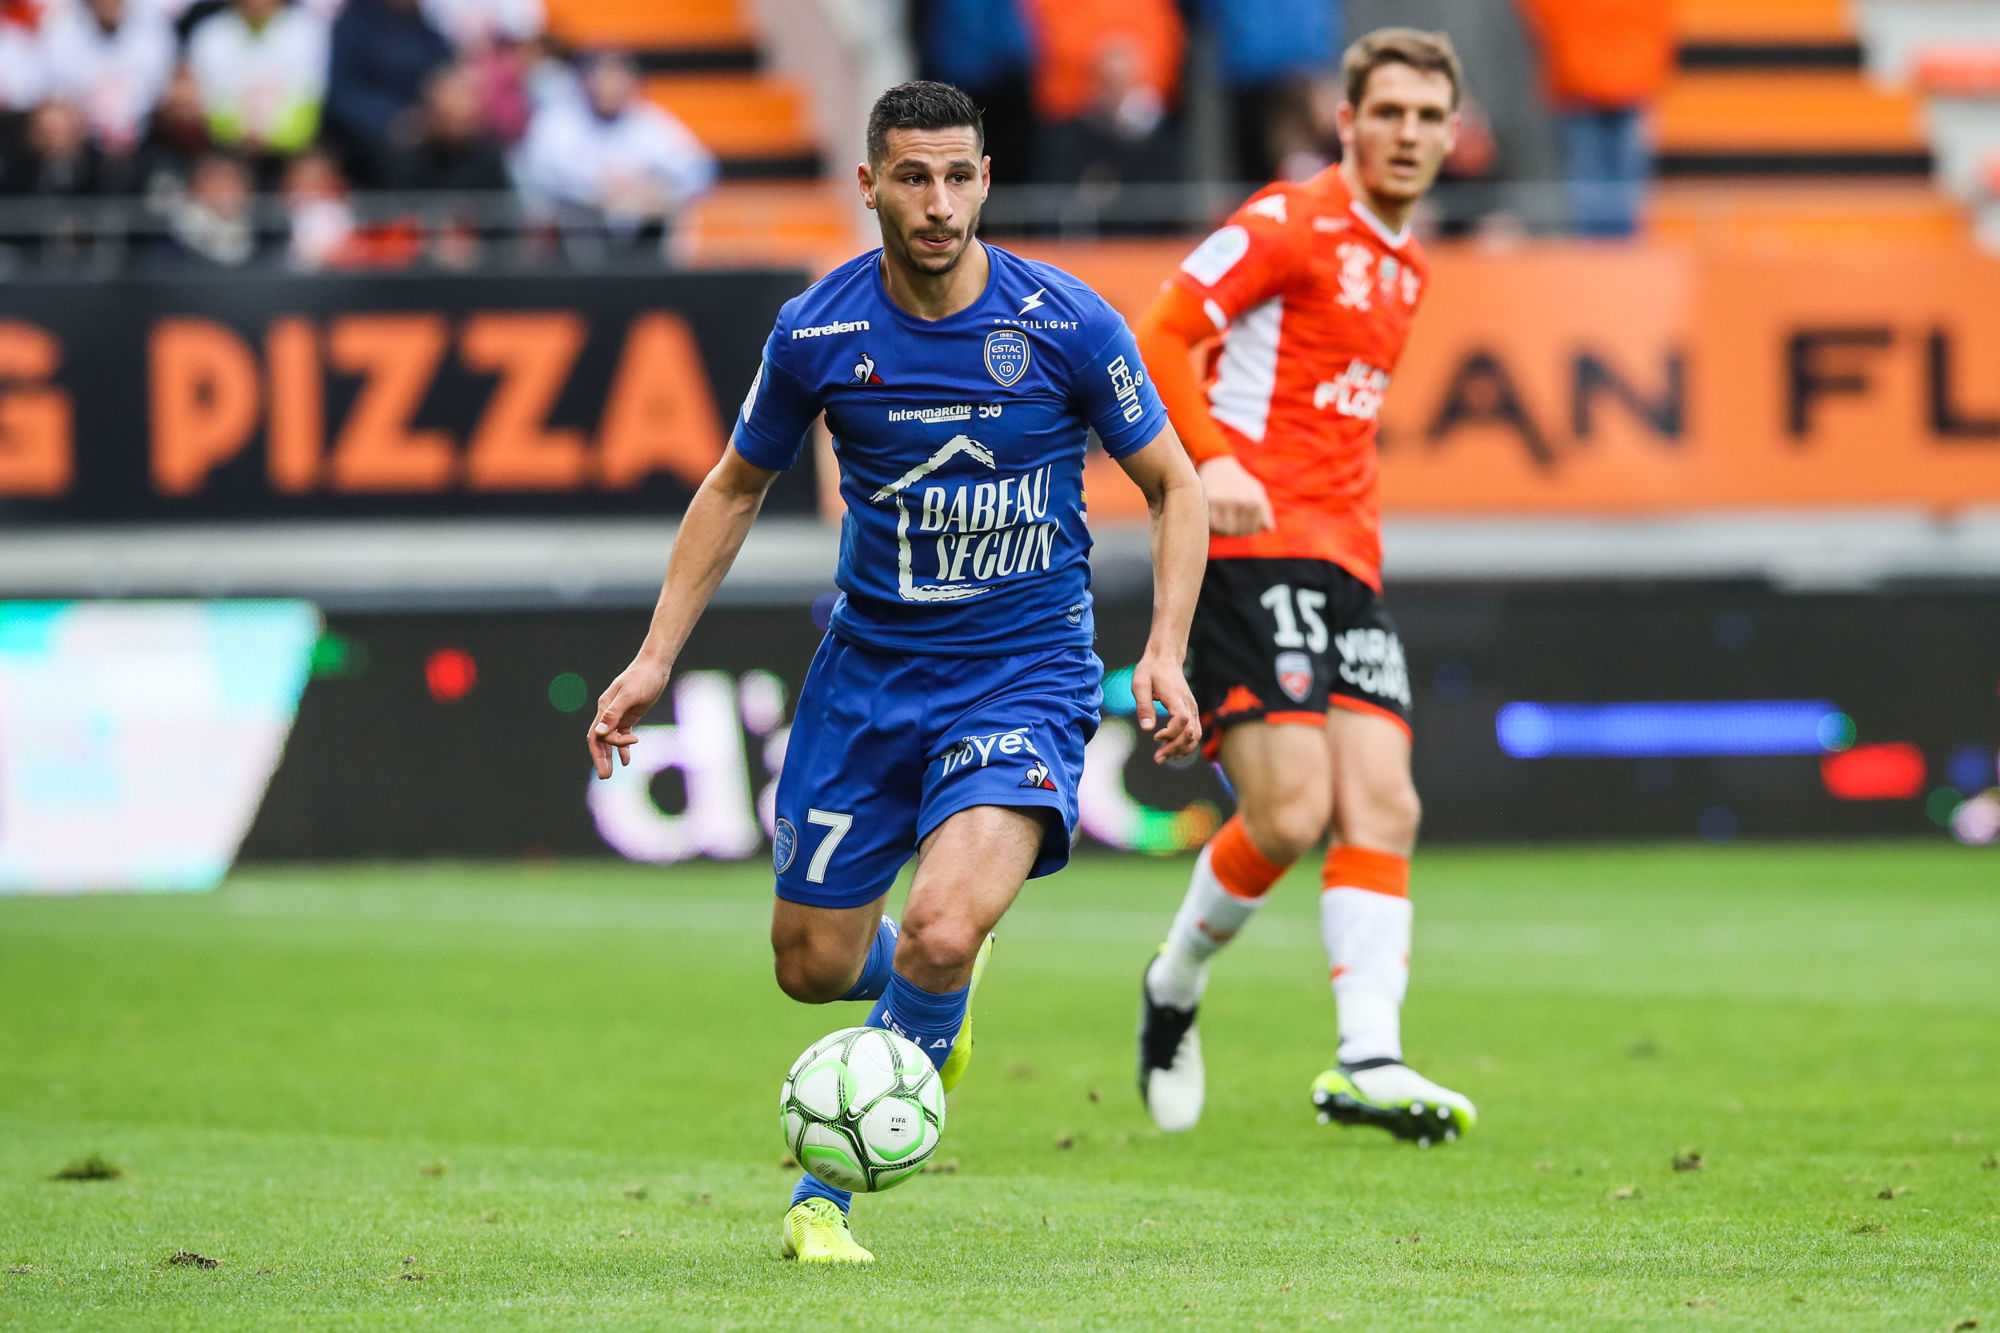 Yoann TOUZGHAR of Troyes during the Ligue 2 match between Lorient and Troyes on October 26, 2019 in Lorient, France. (Photo by Vincent Michel/Icon Sport) - Yoann TOUZGHAR - Stade du Moustoir - Lorient (France)